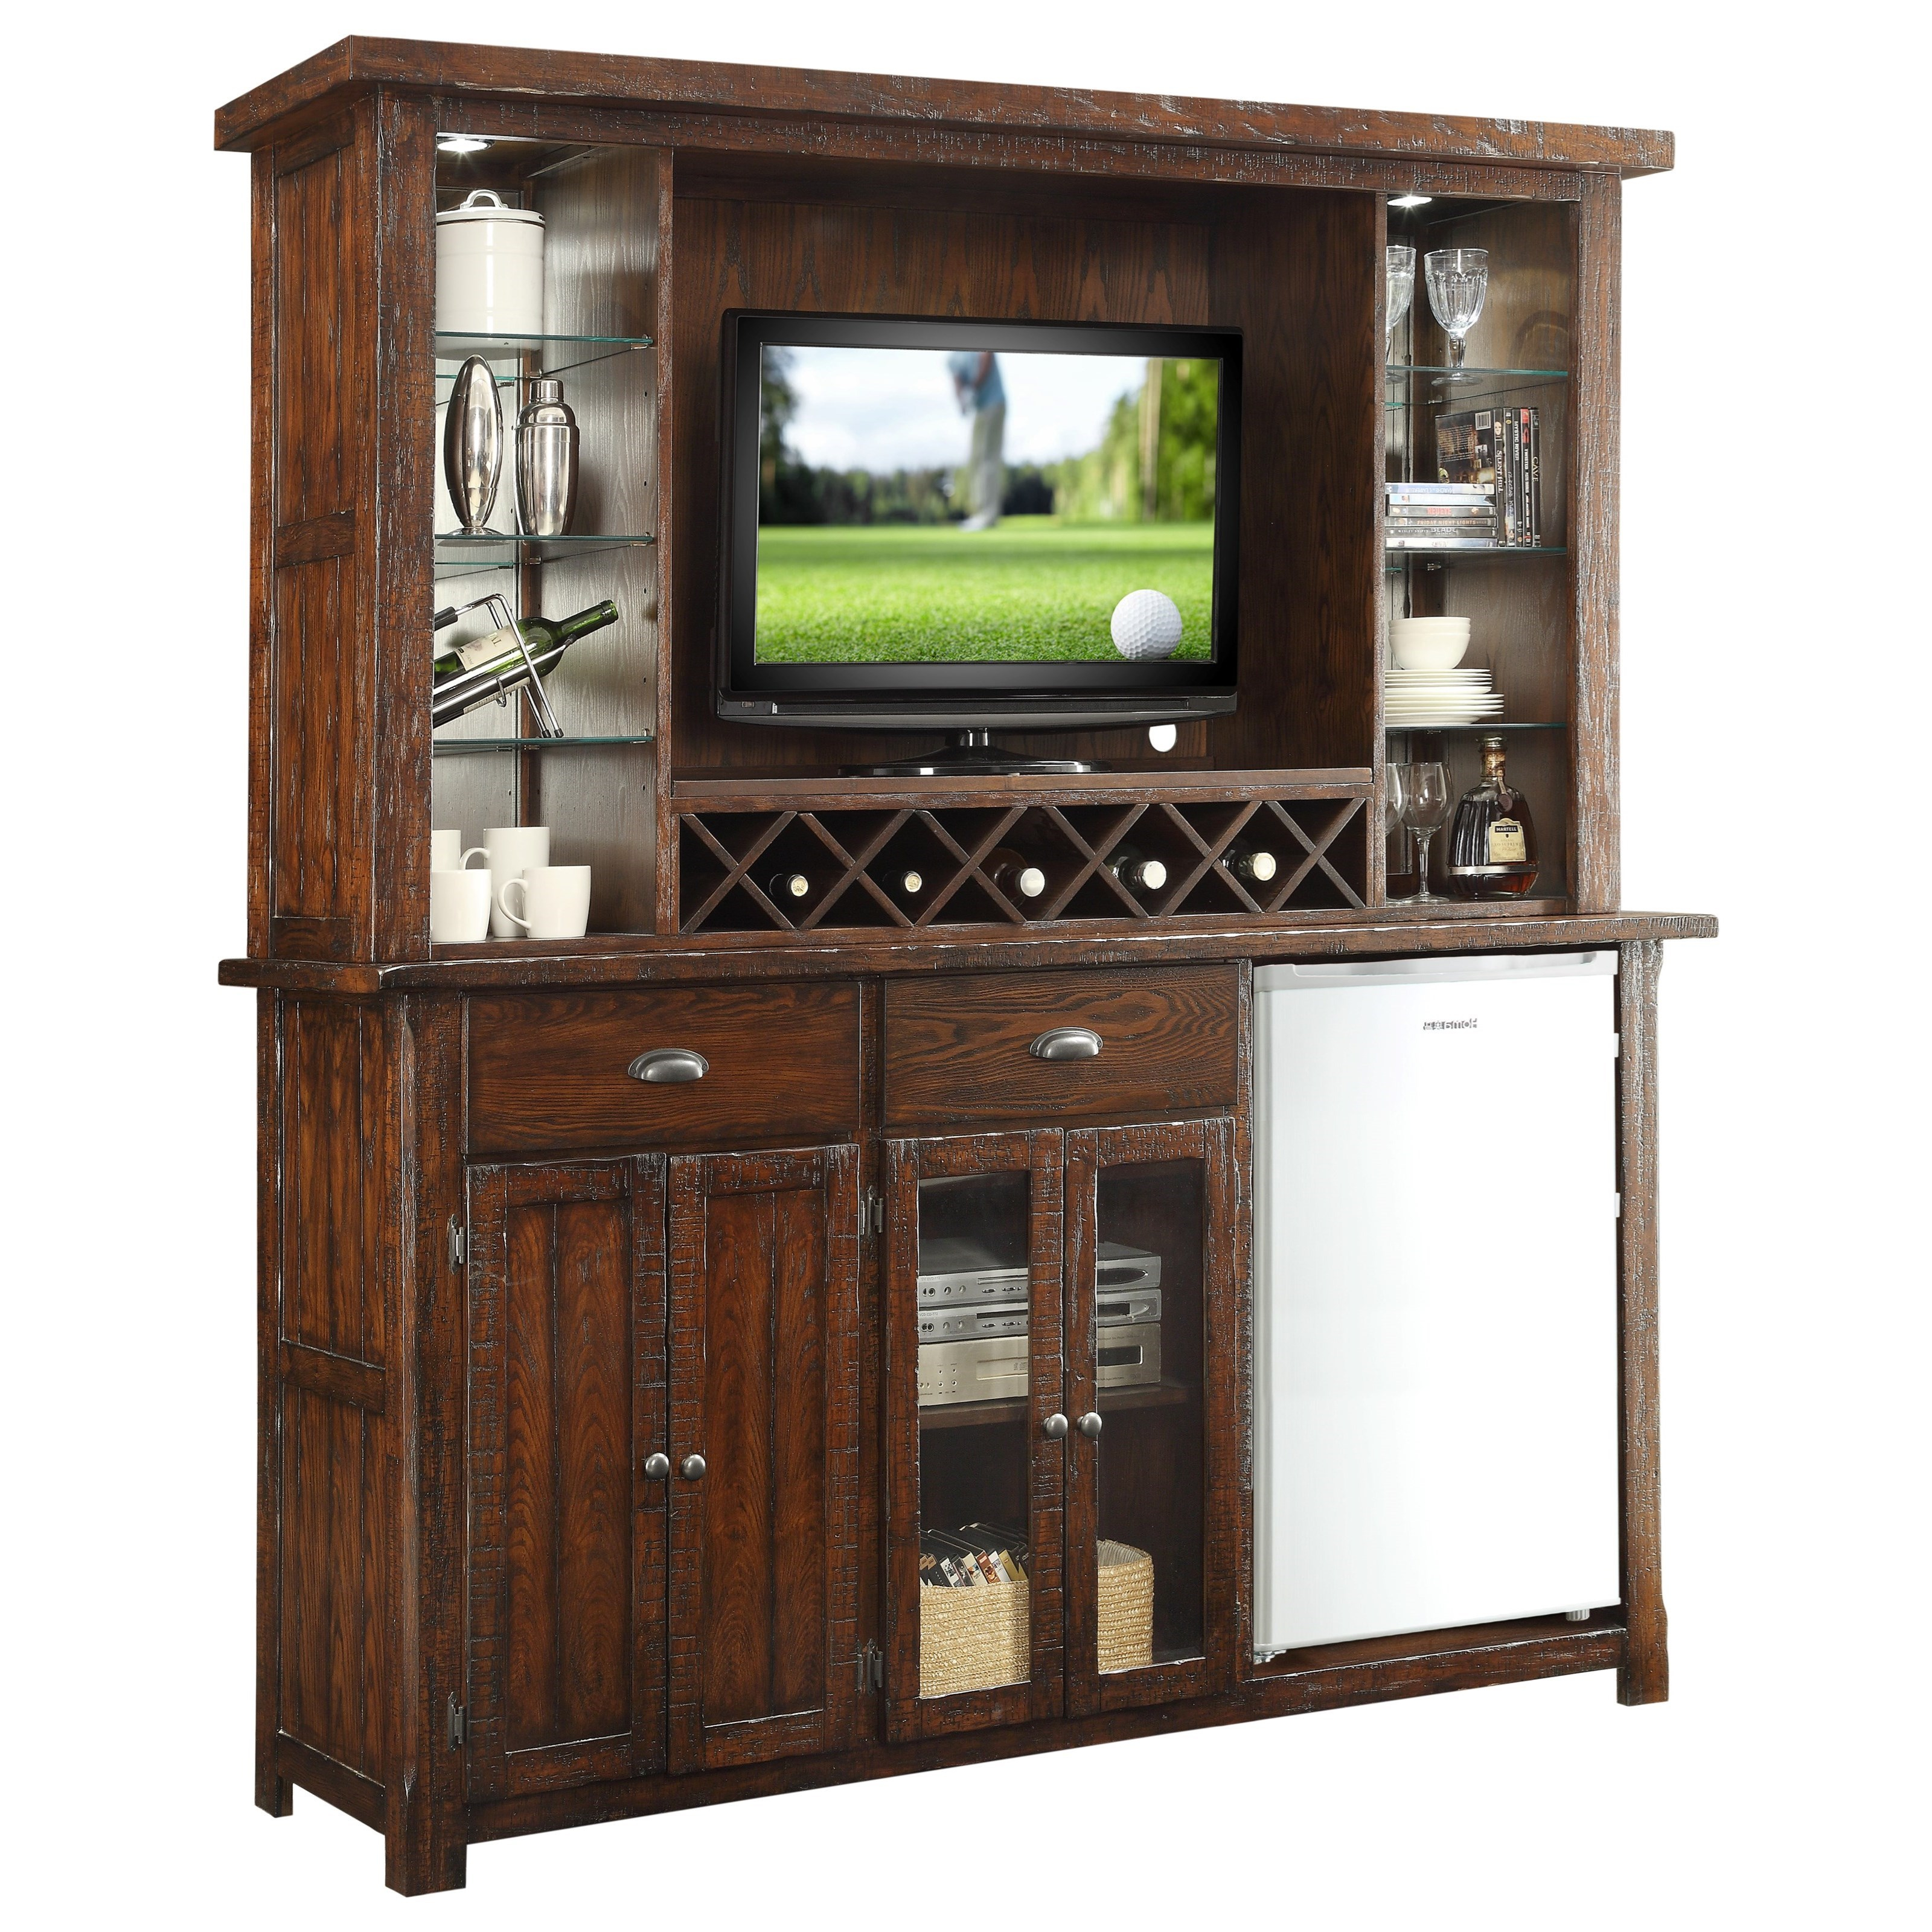 Gettysburg Gettysburg Bar Cabinet With Built In Wine Rack Eci Furniture At Wayside Furniture inside proportions 3200 X 3200